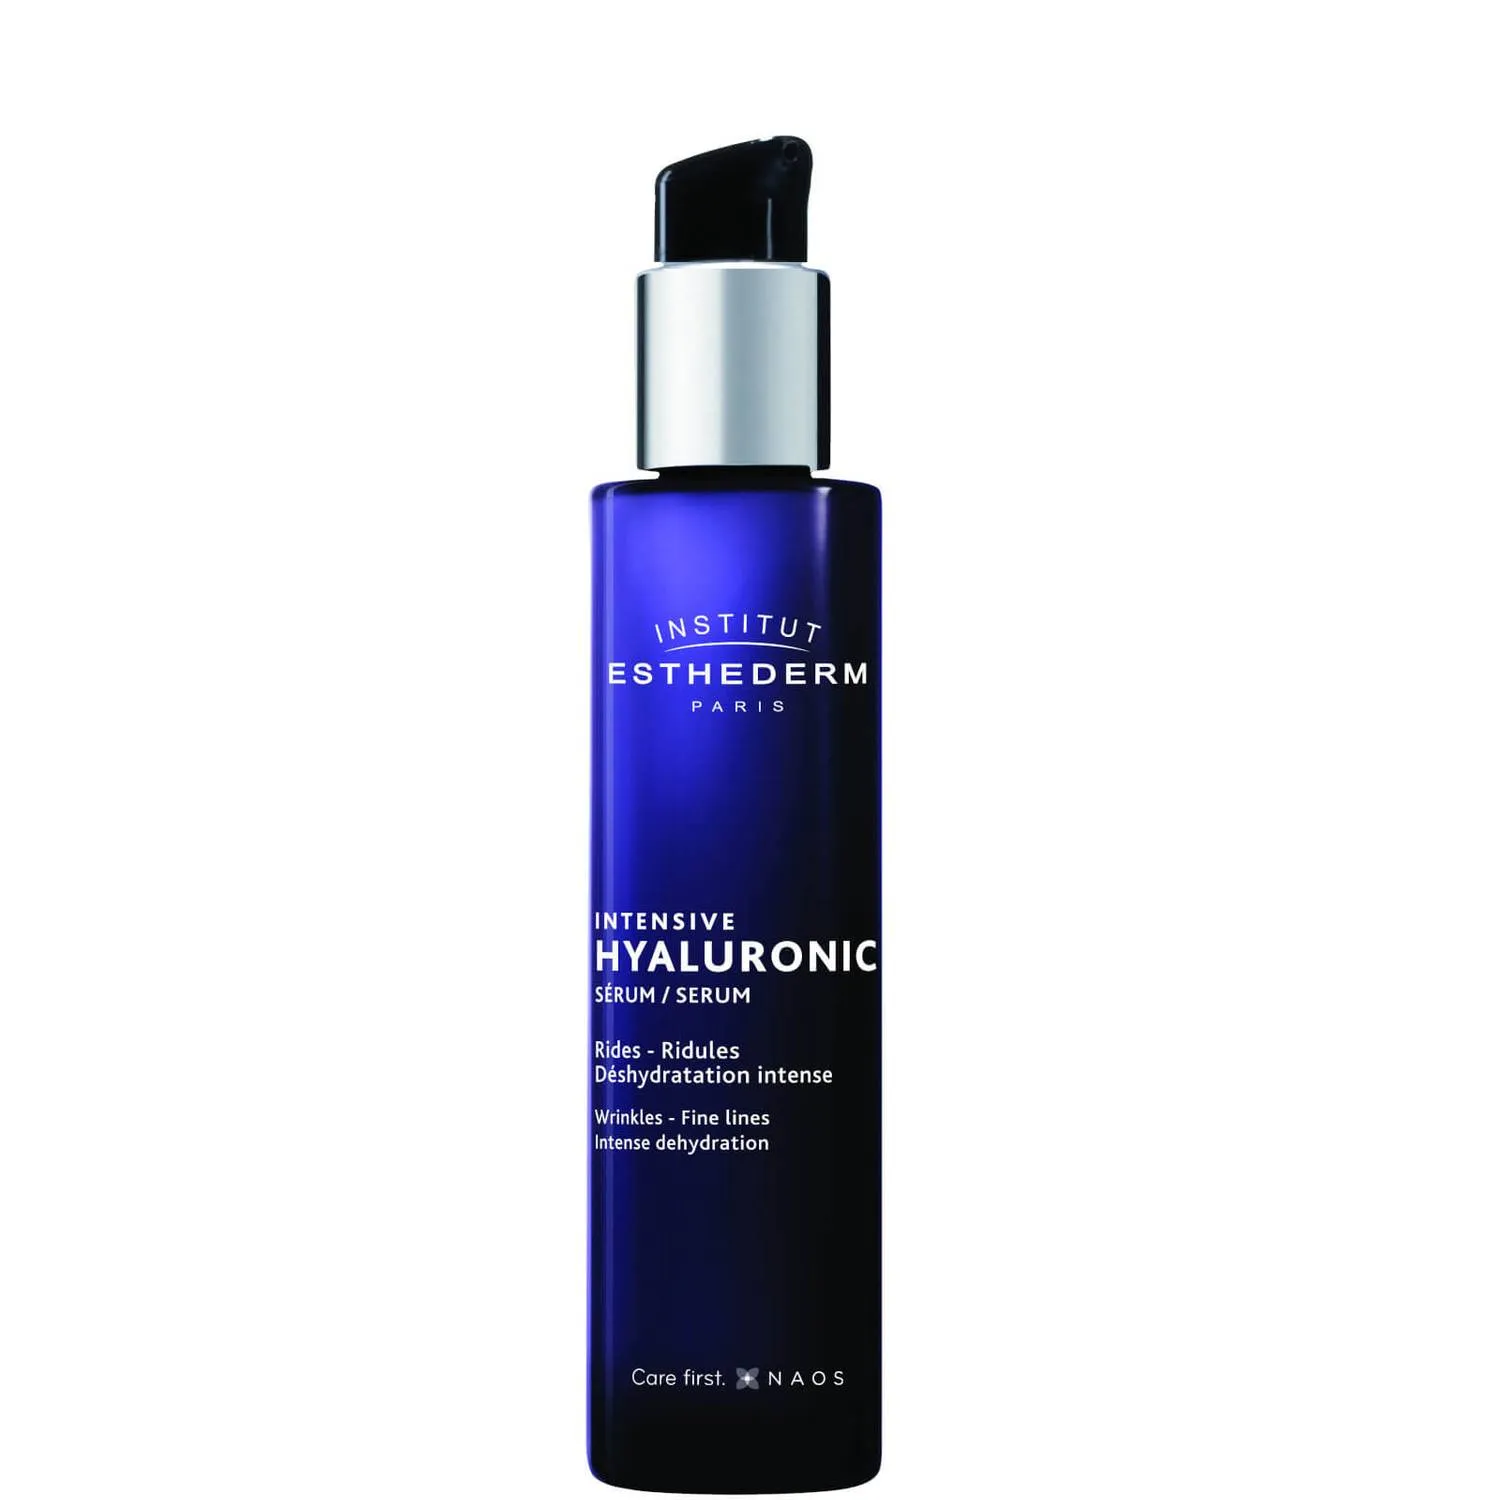 Intensive Hyaluronic Acid Serum by Institut Esthederm, one of the best French hydrating serums.